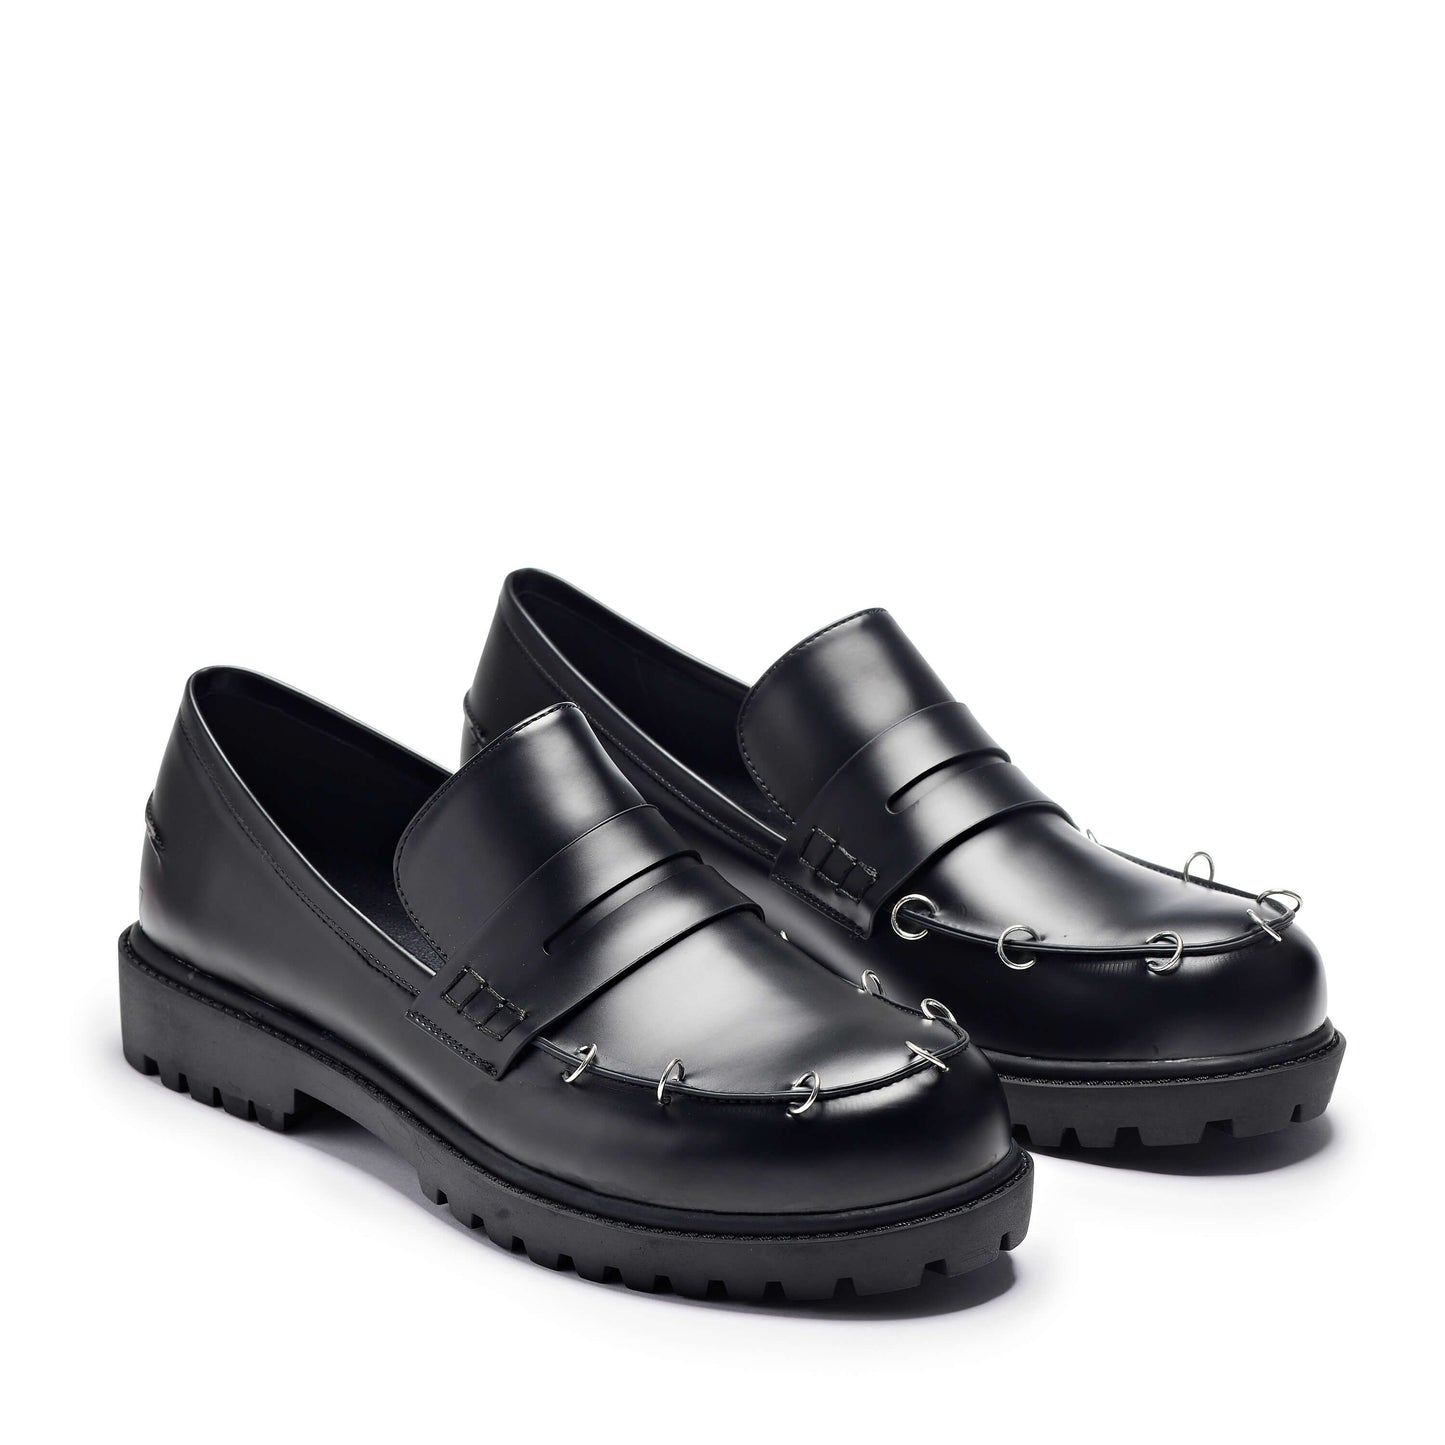 The Kaiden Pierced Men's Loafers - Shoes - KOI Footwear - Black - Three-Quarter View